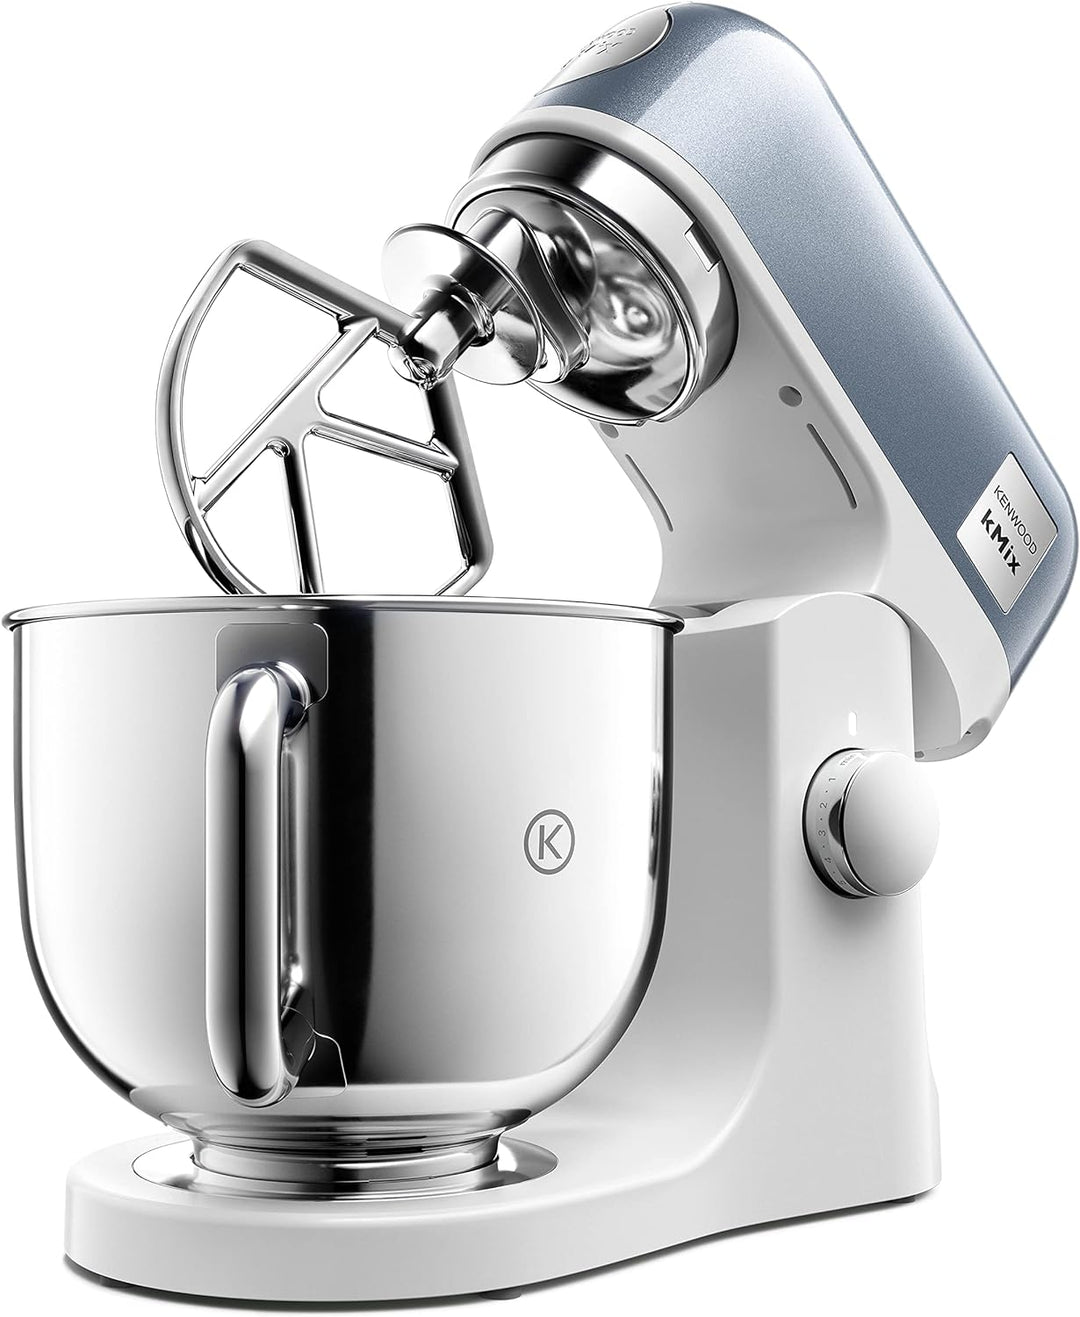 Kenwood kMix Stand Mixer for Baking, Stylish Kitchen Mixer with K-beater, Dough Hook and Whisk, 5L Stainless Steel Bowl, Removable Splash Guard, 1000 W, Editions Blue